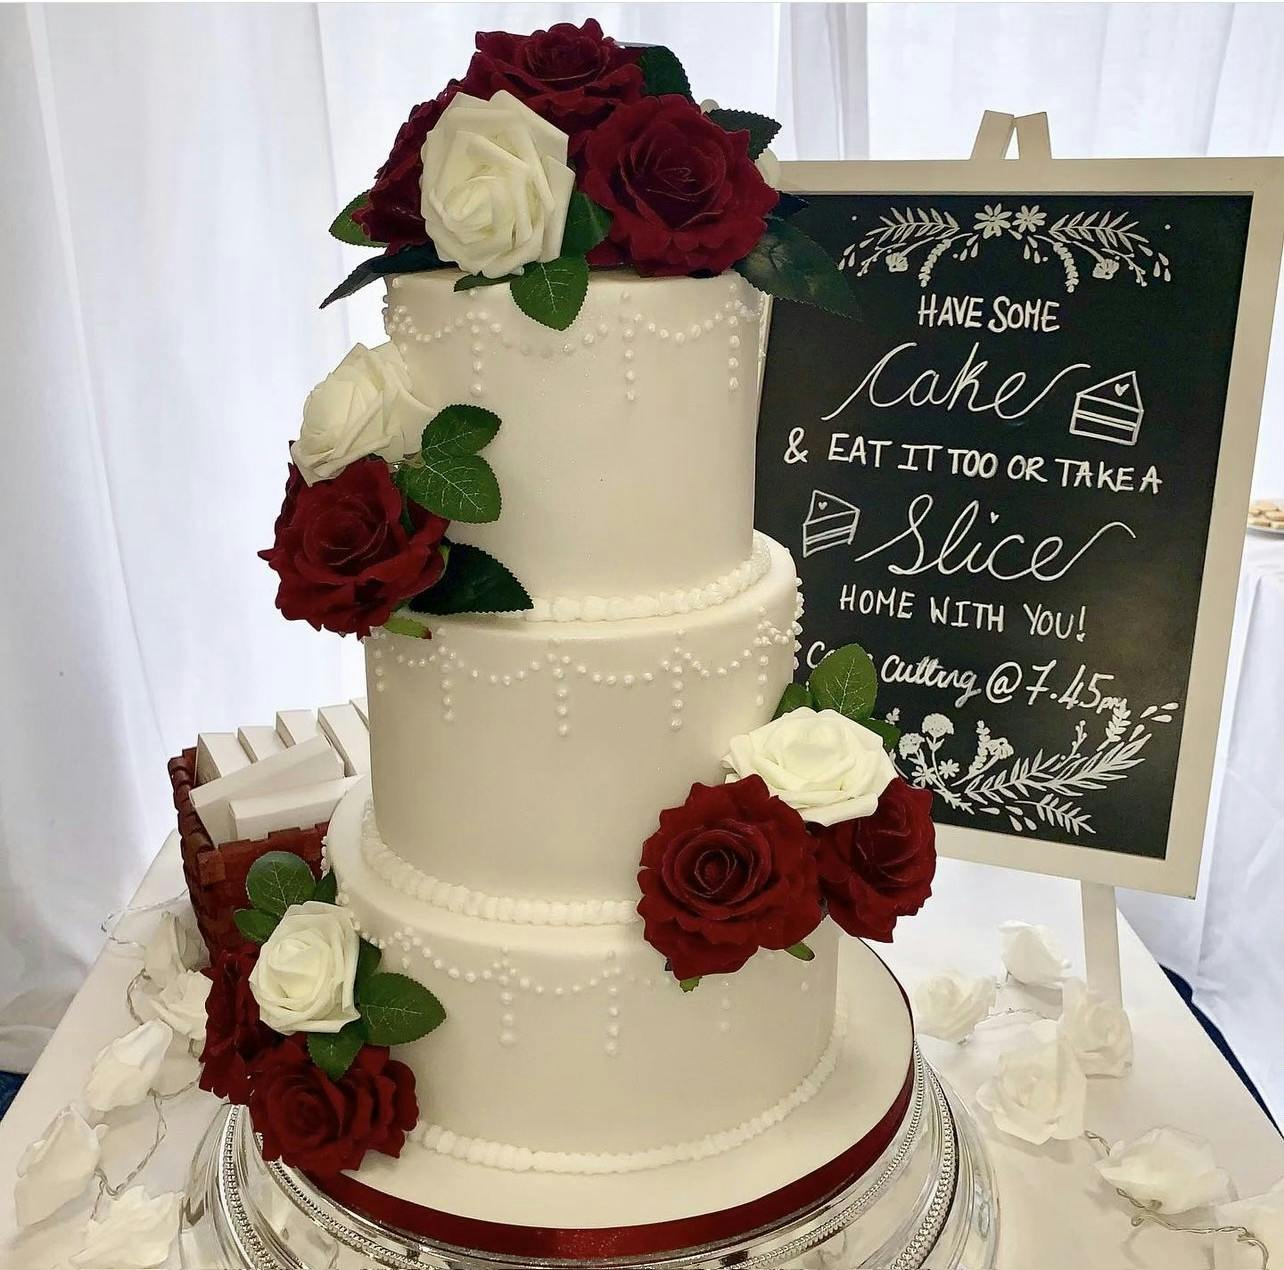 White wedding cake with red roses, white roses and cake pearls next to a chalk board